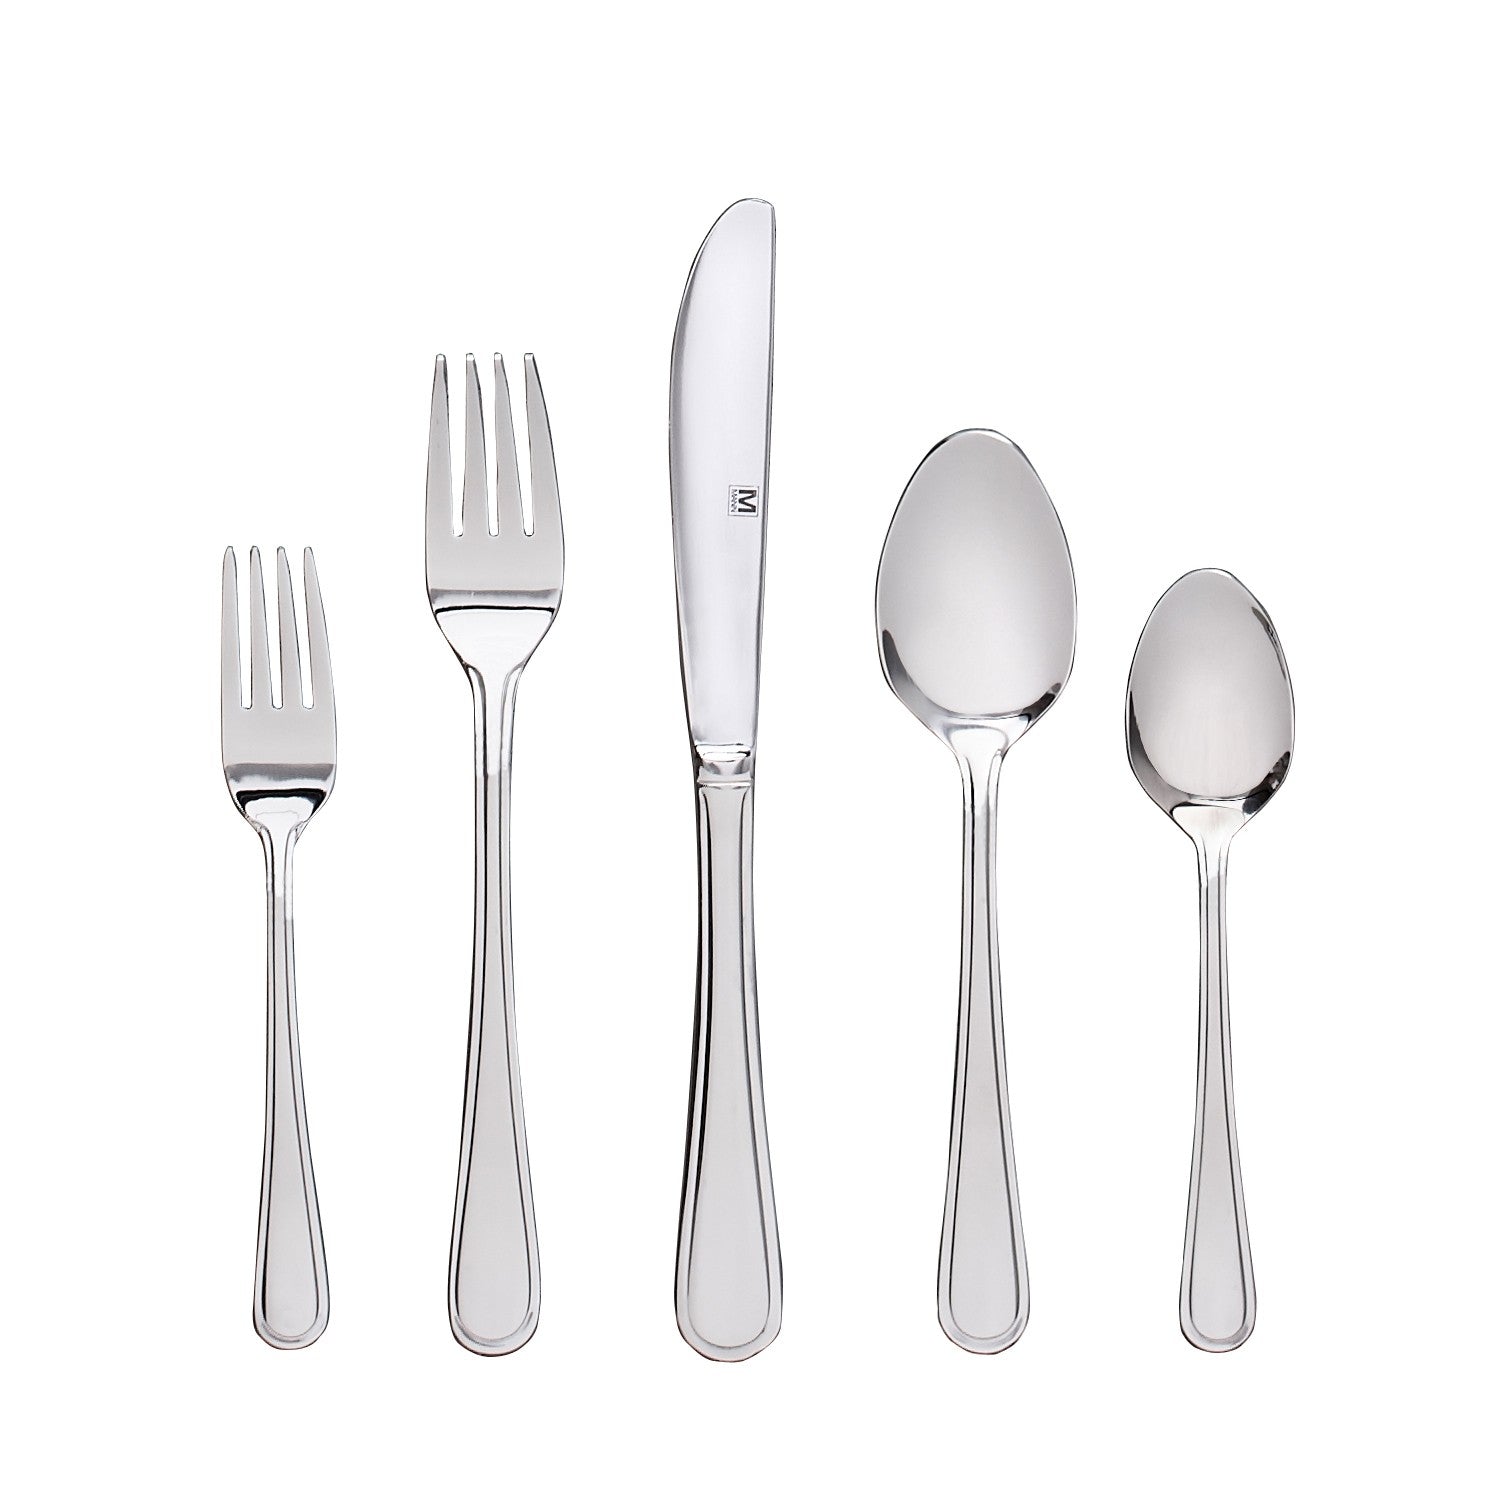 title:Safdie & Co. Flatware Stainless Steel 20PC Set Kelby;color:Silver